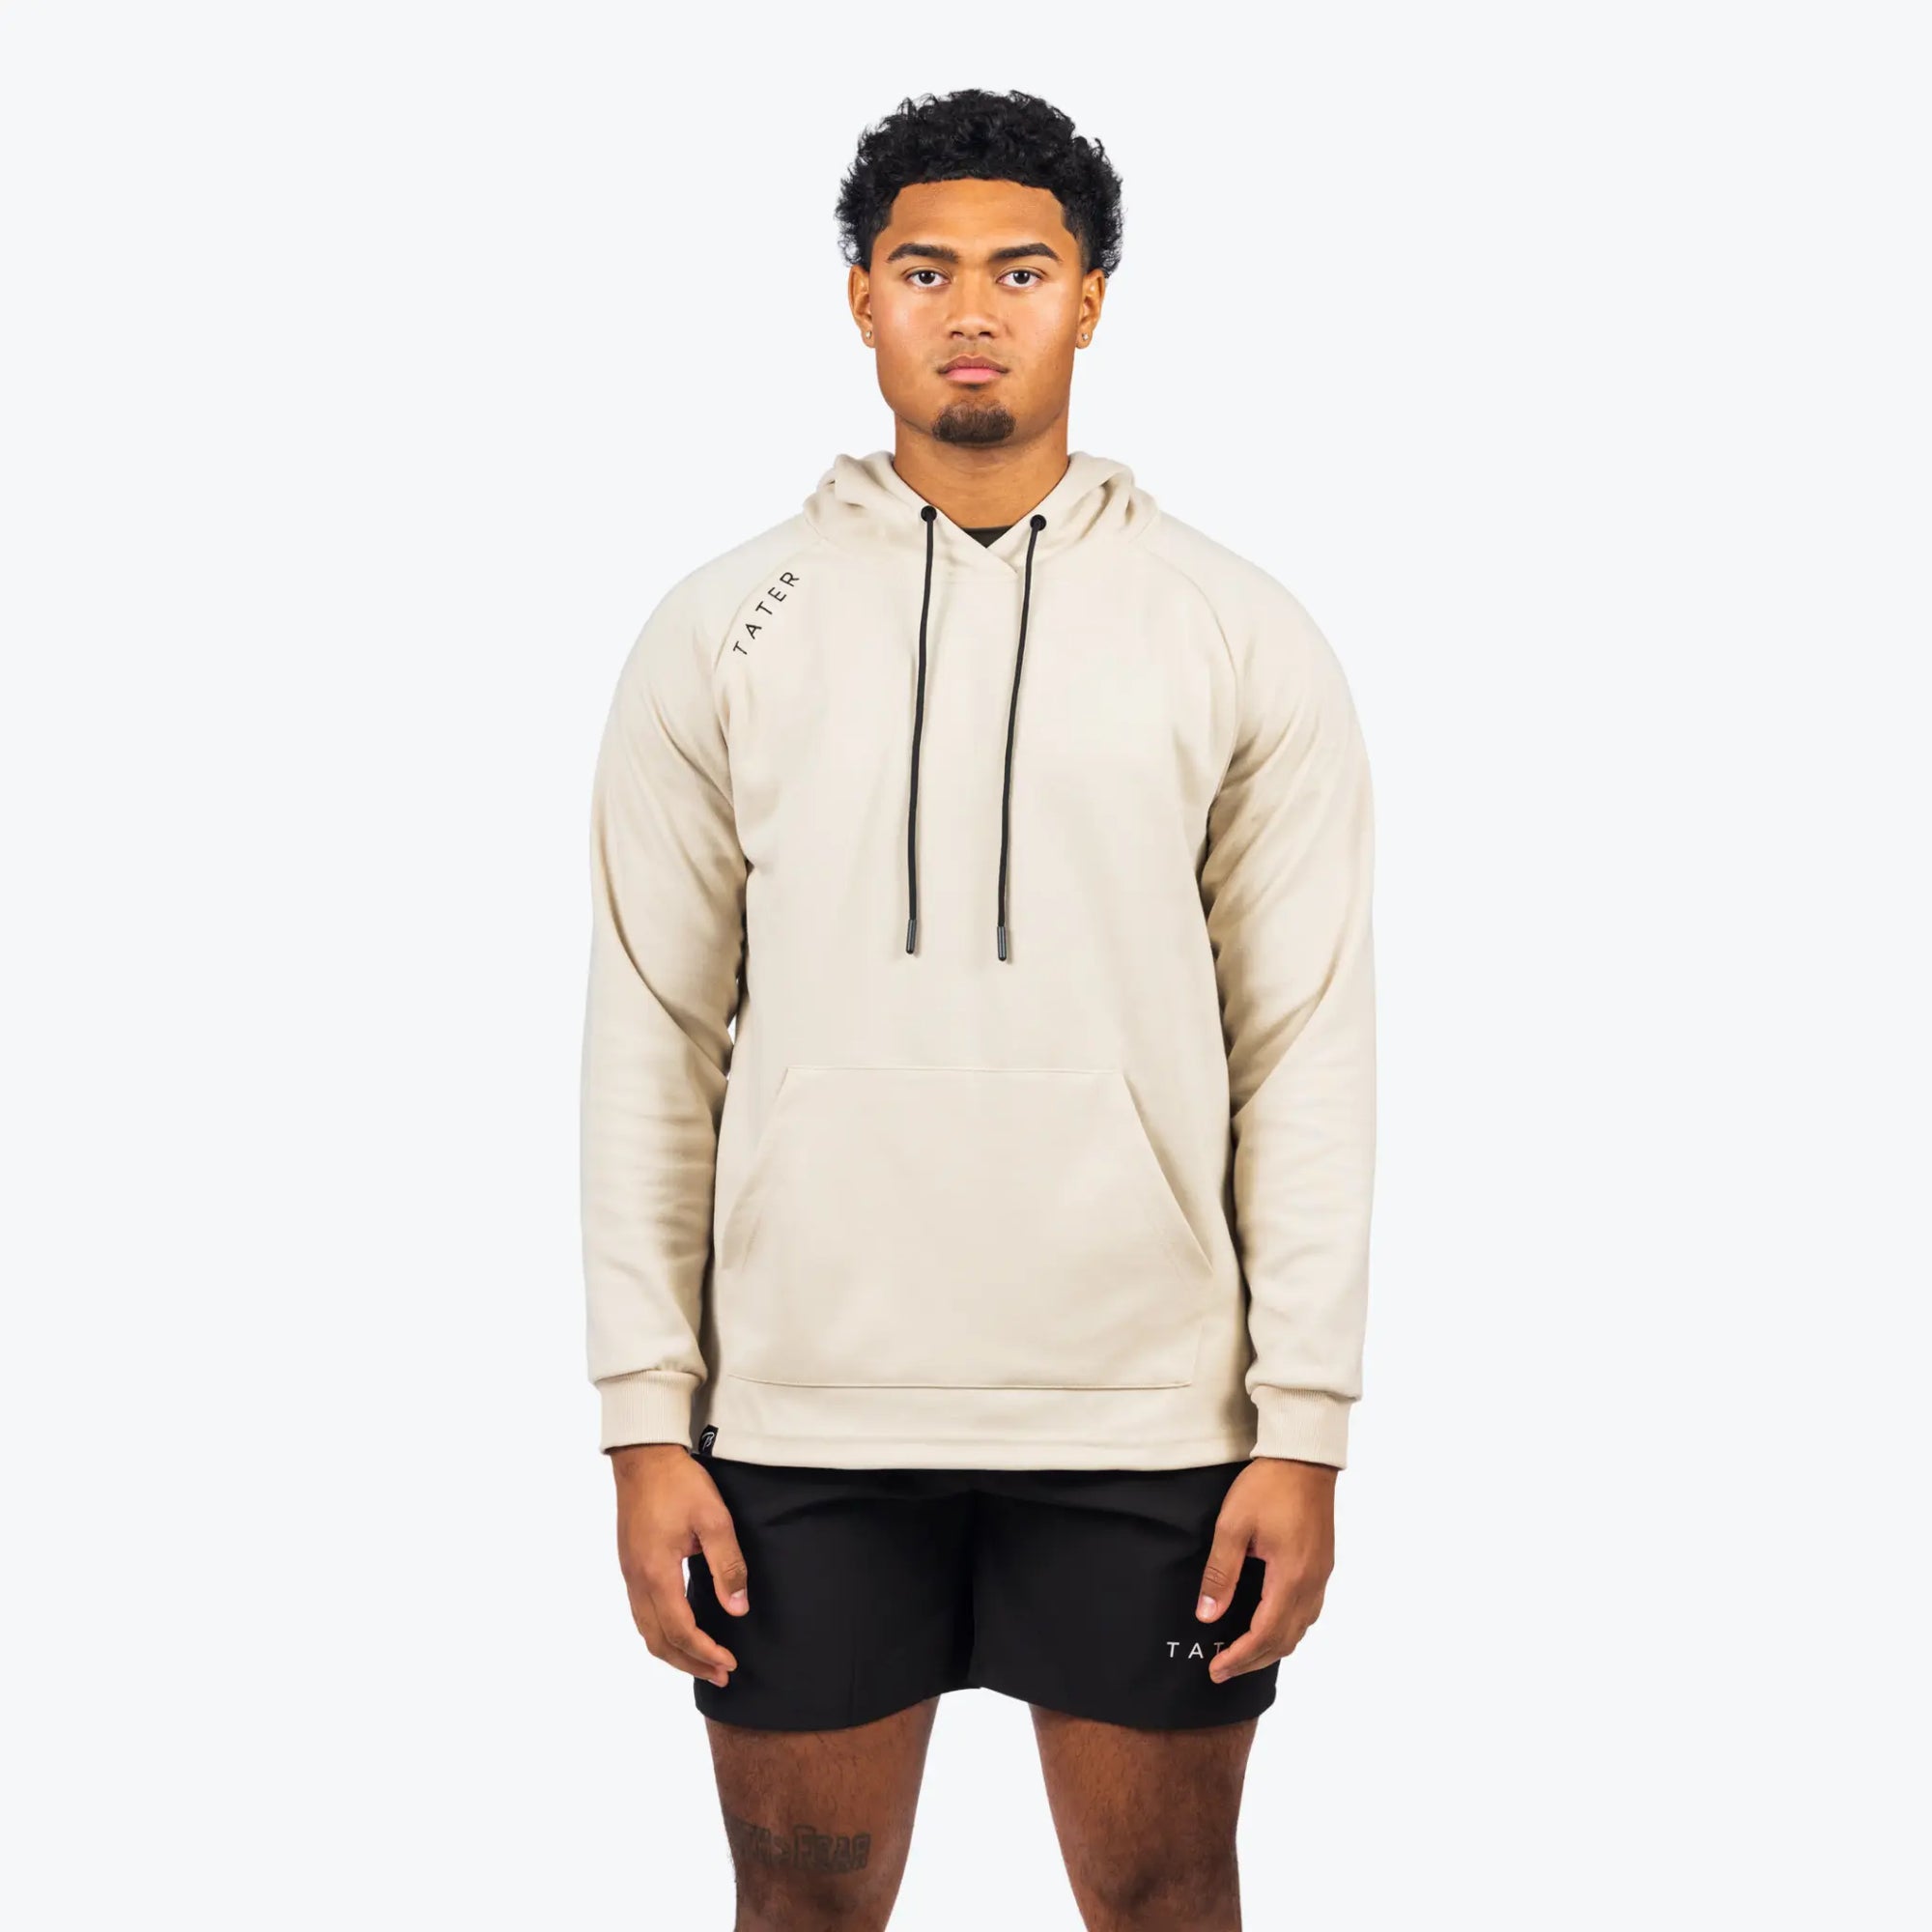 The uploaded image displays a cream-colored, professional baseball training hoodie from the Tater brand. It has long sleeves and features a minimalist design with the "TATER" logo neatly placed on the left chest area. The hoodie appears to be crafted for both athletic functionality and casual athleisure wear, embodying a sleek and straightforward style.